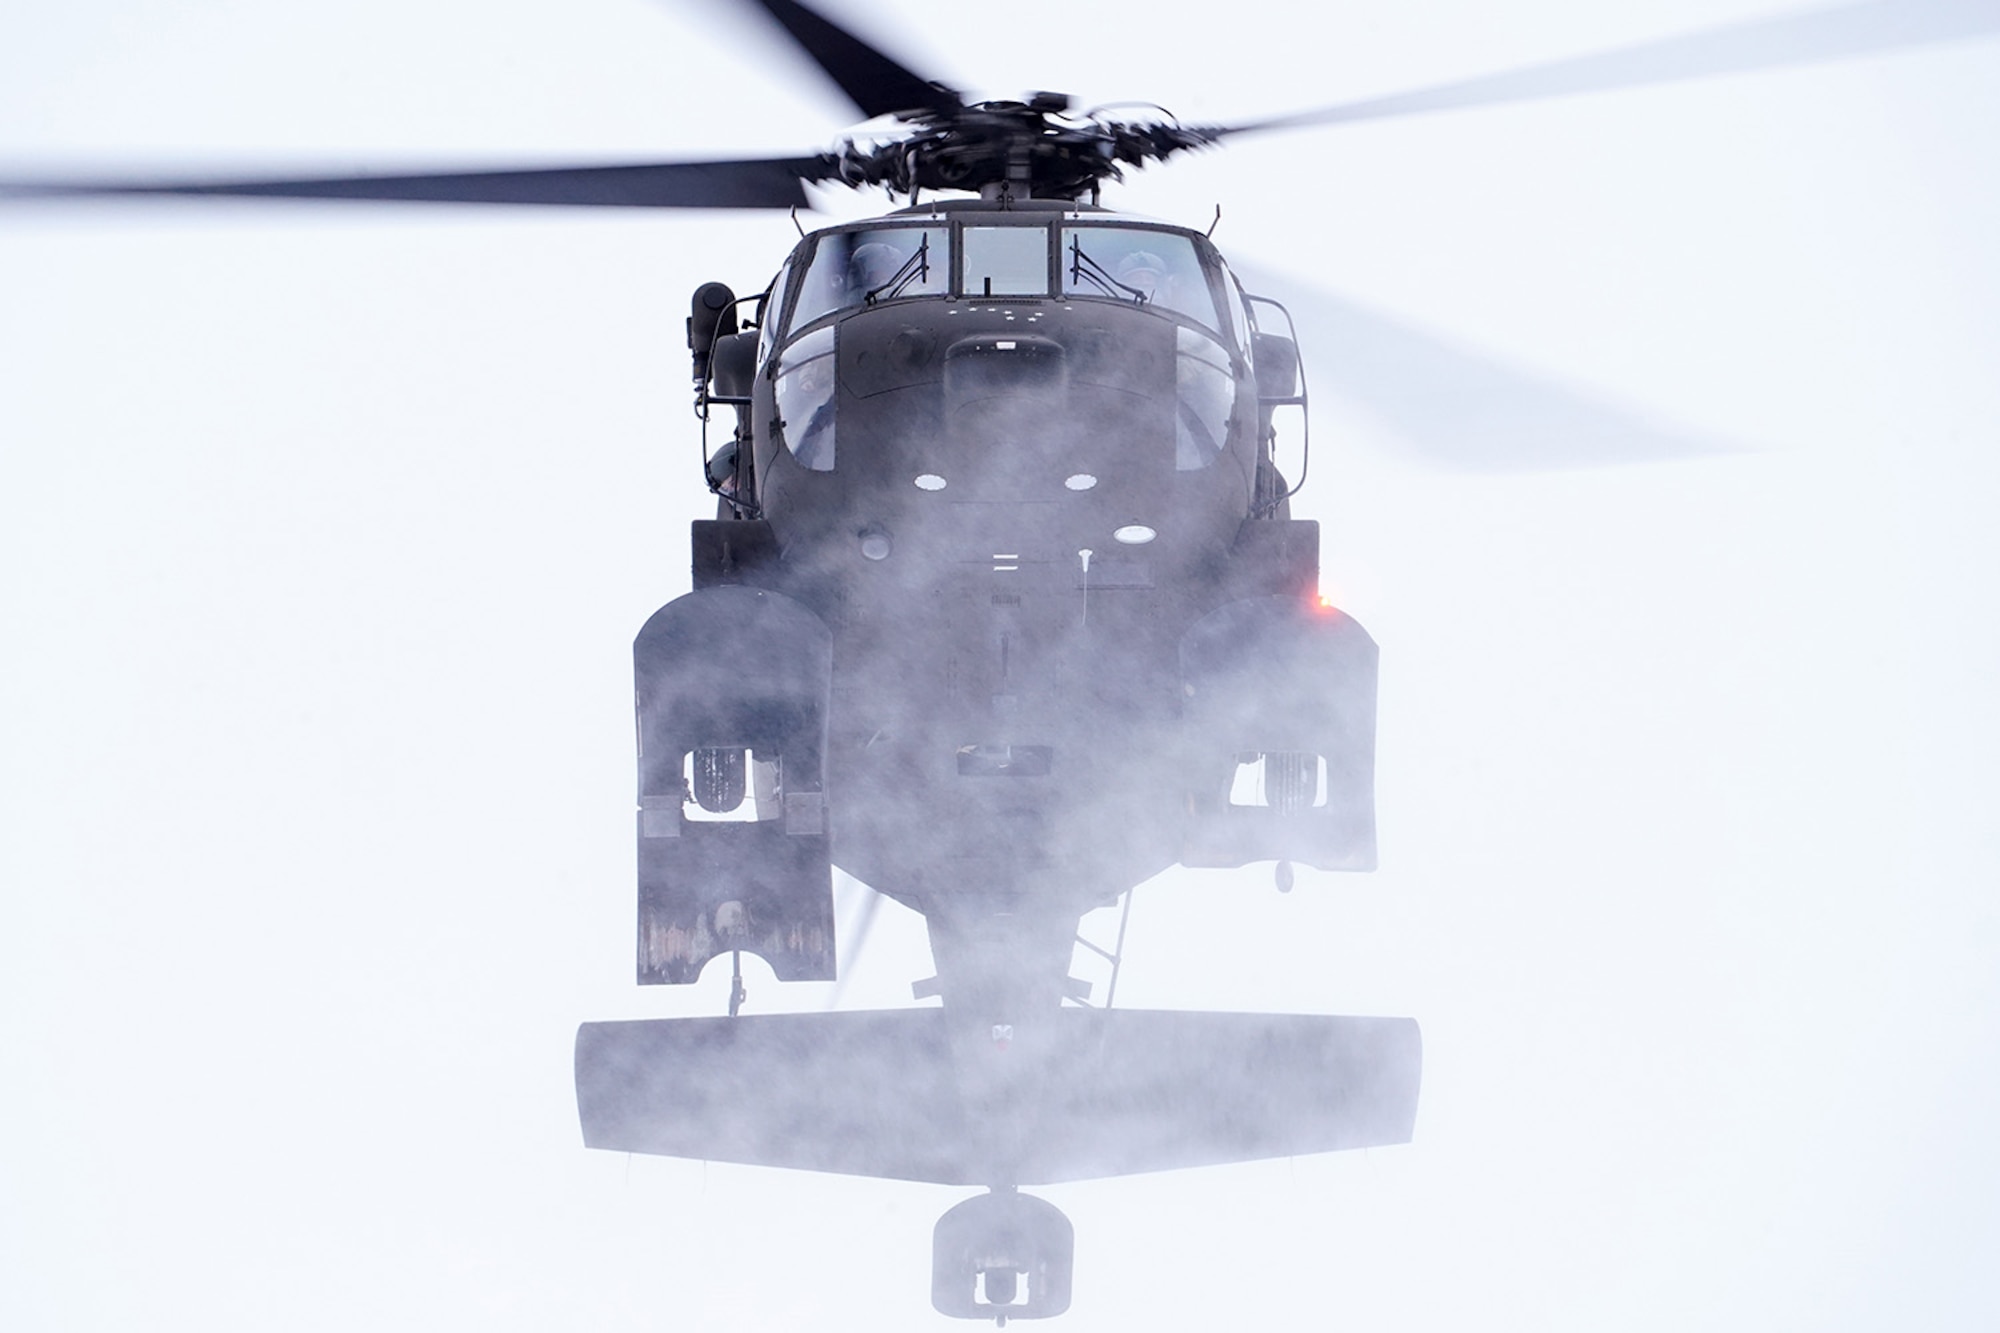 A UH-60 Black Hawk helicopter from the Alaska Army National Guard approaches Neibhur Drop Zone, Nov. 26, 2019, to assist Soldiers assigned to the 6th Brigade Engineer Battalion (Airborne), 4th Infantry Brigade Combat Team (Airborne), 25th Infantry Division, U.S. Army Alaska, in honing their life-saving and Medevac hoist skills for the paratroopers’ upcoming rotation to the Joint Readiness Training Center at Fort Polk, La.